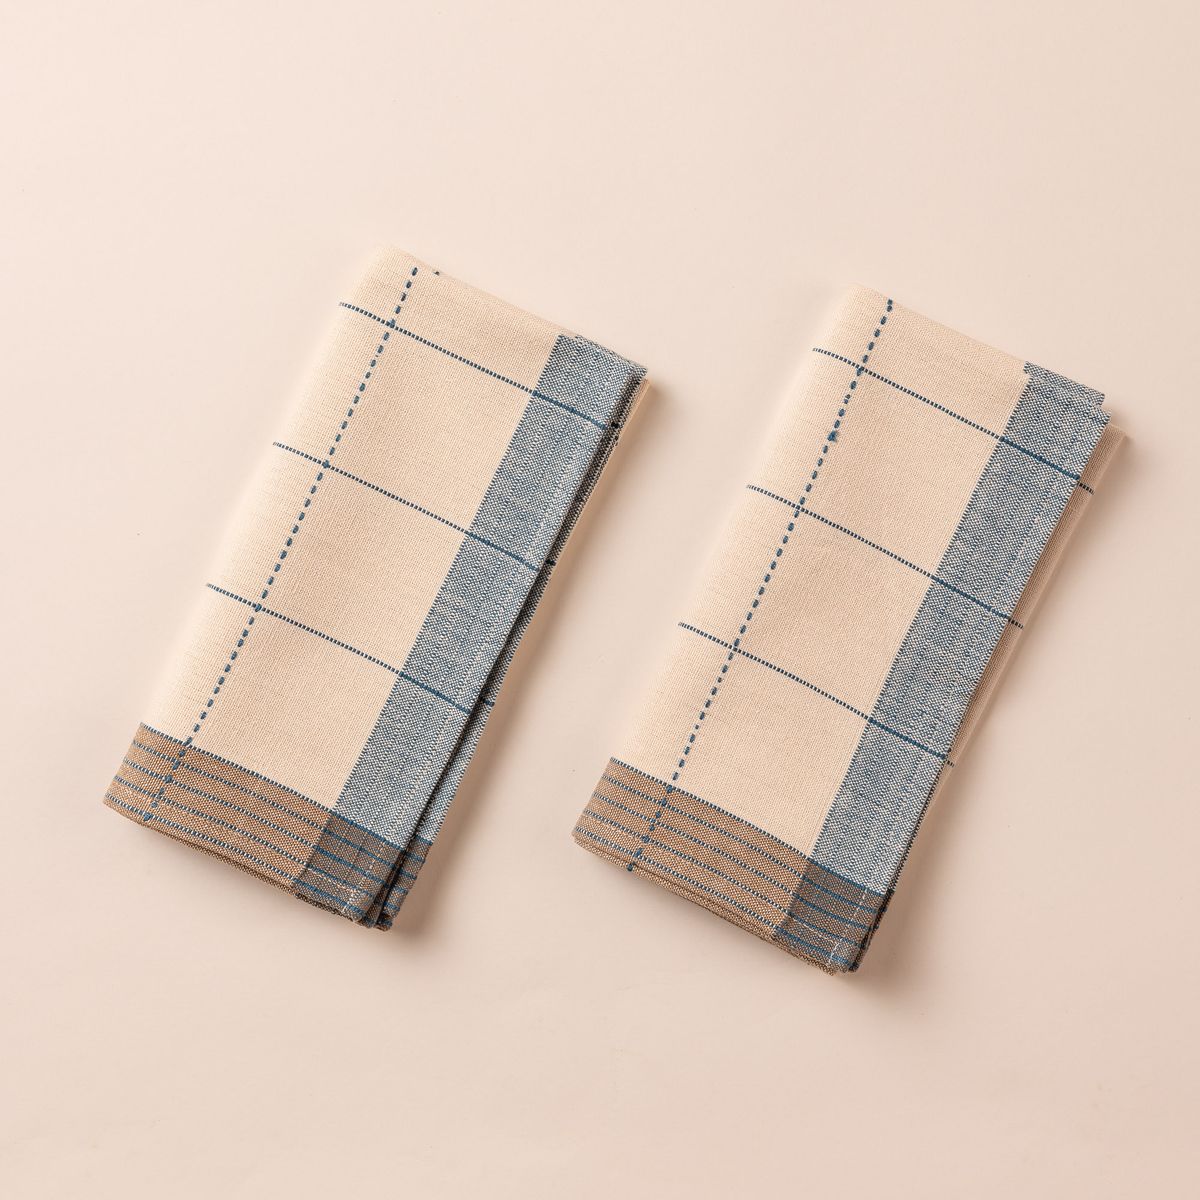  Two natural folded napkins side by side that are designed with turquoise gridlines with light blue and tan striped edging.